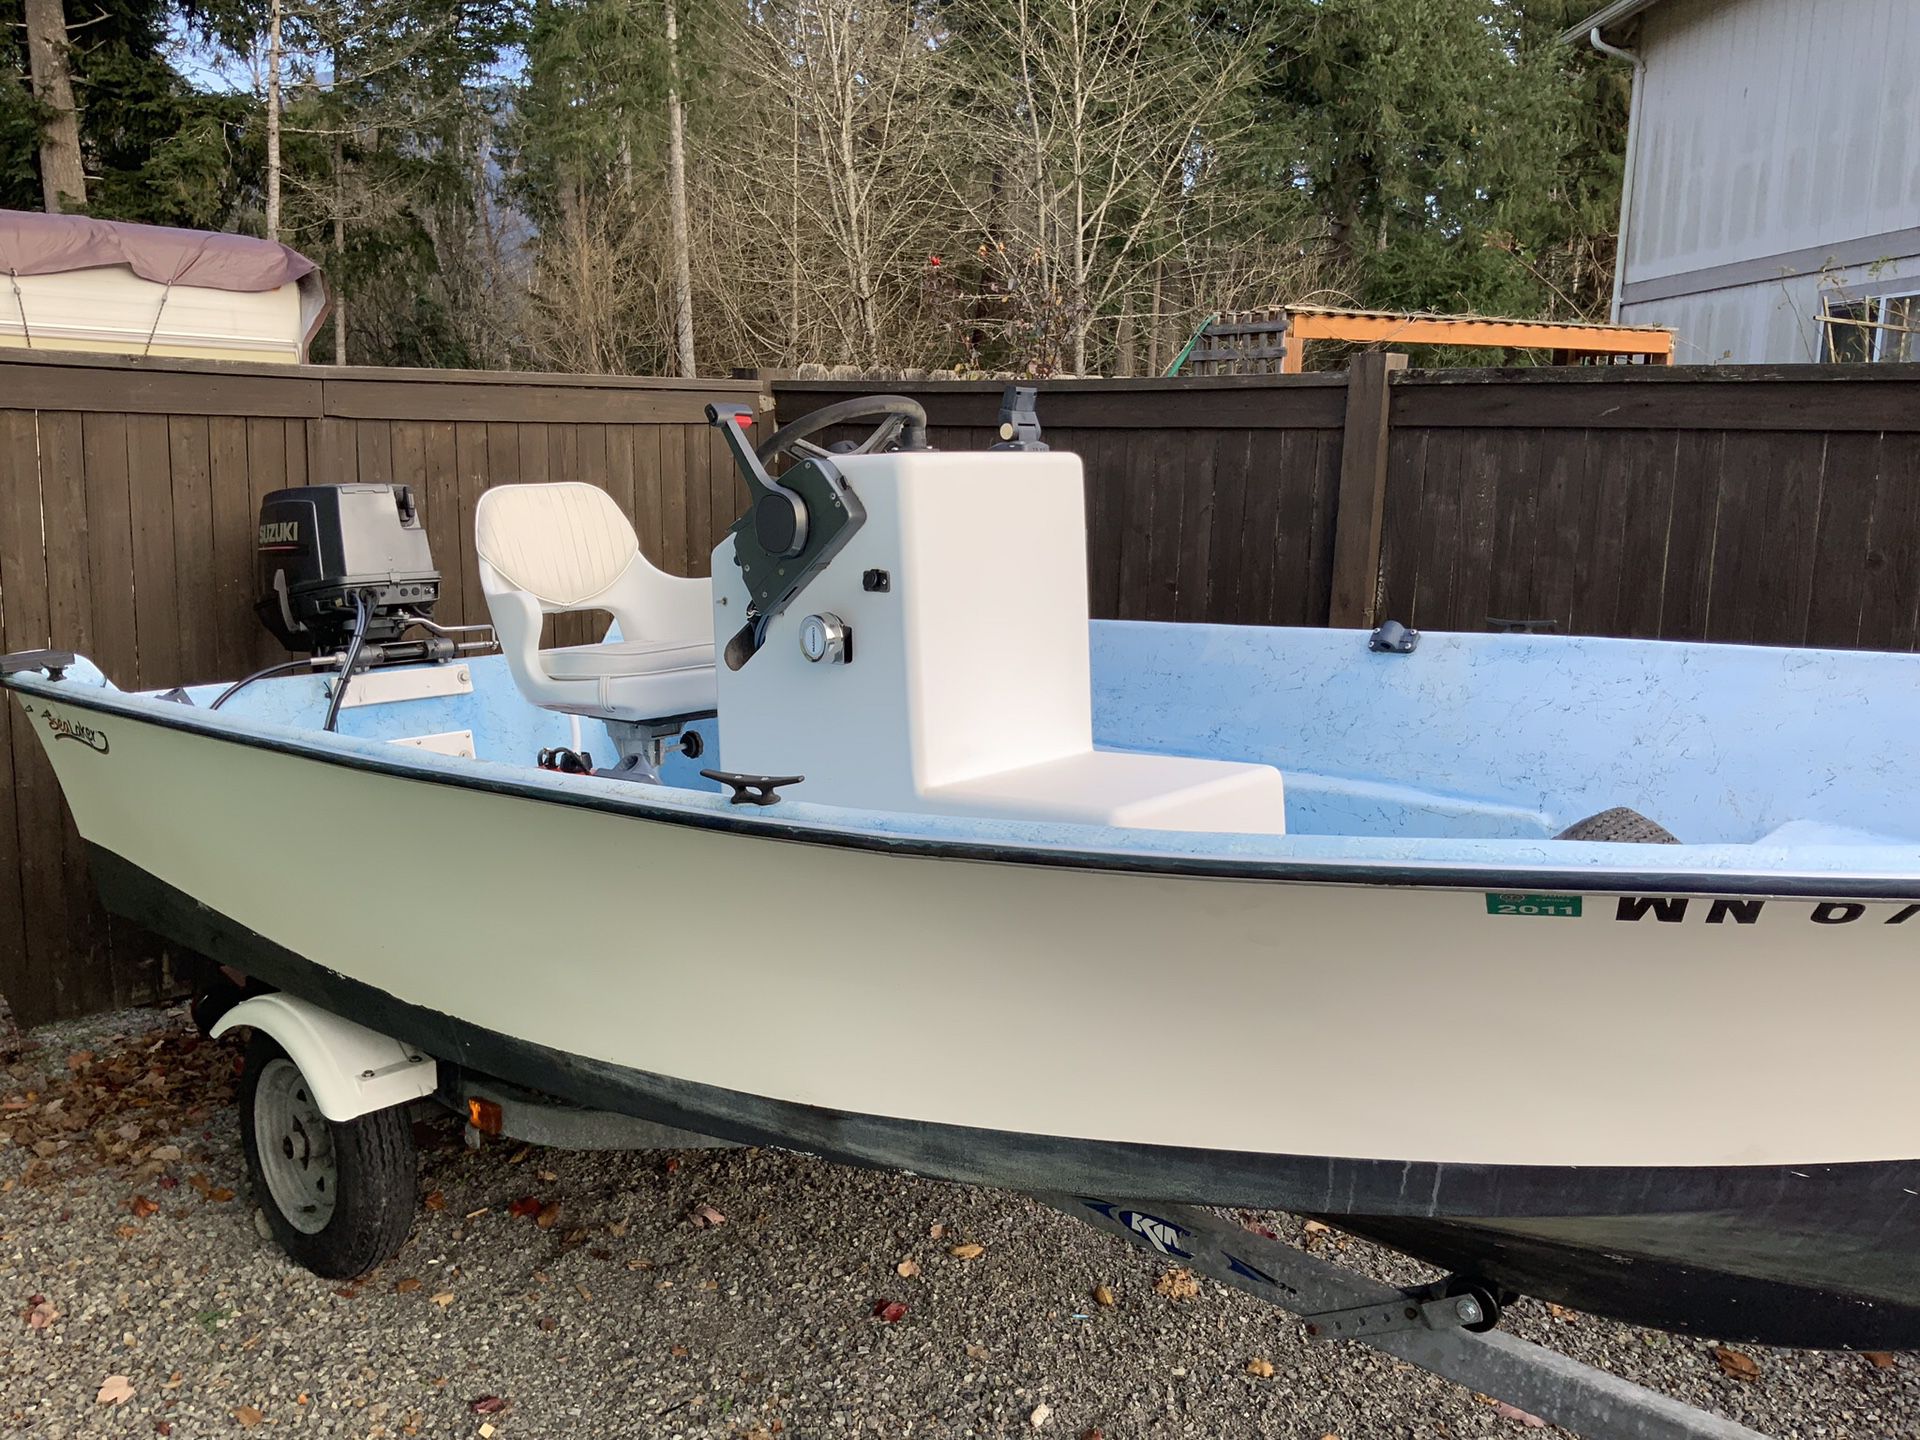 1995 sealaker 14ft boat with trailer 40 hp motor And Downriggers $2500 great fishing boat